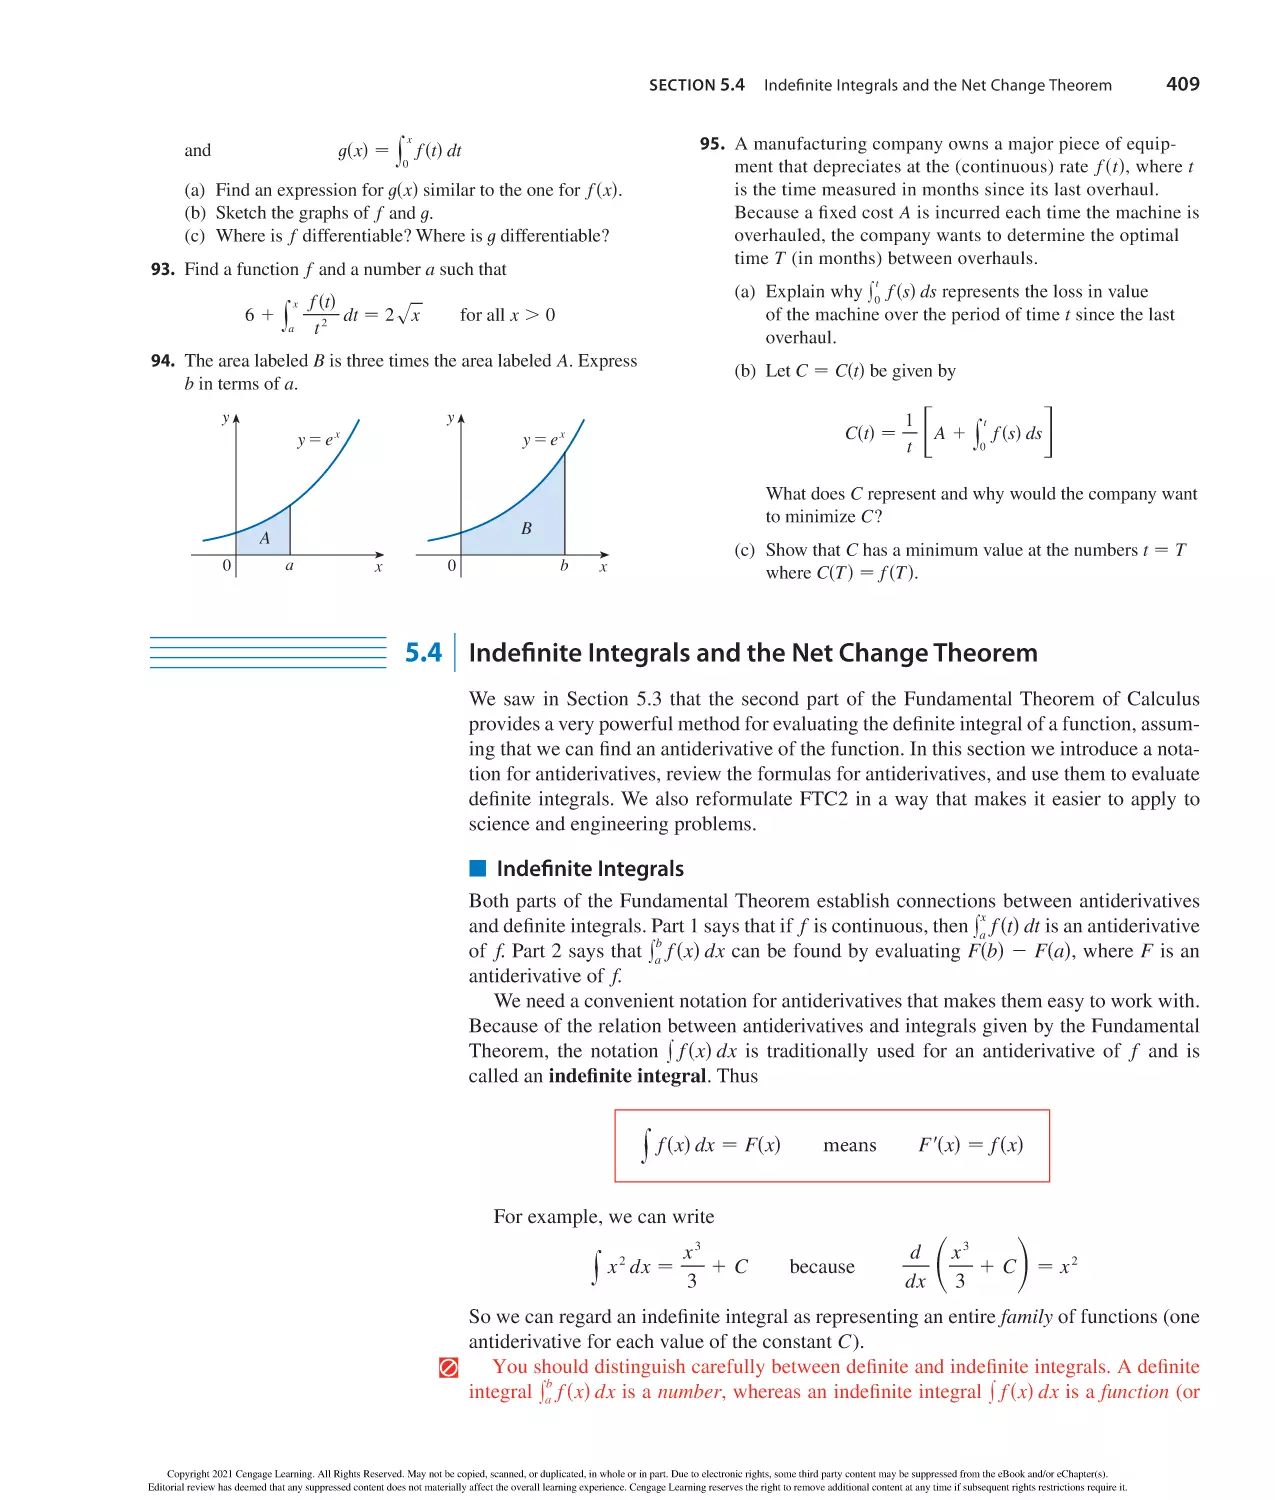 5.4 Indefinite Integrals and the Net Change Theorem